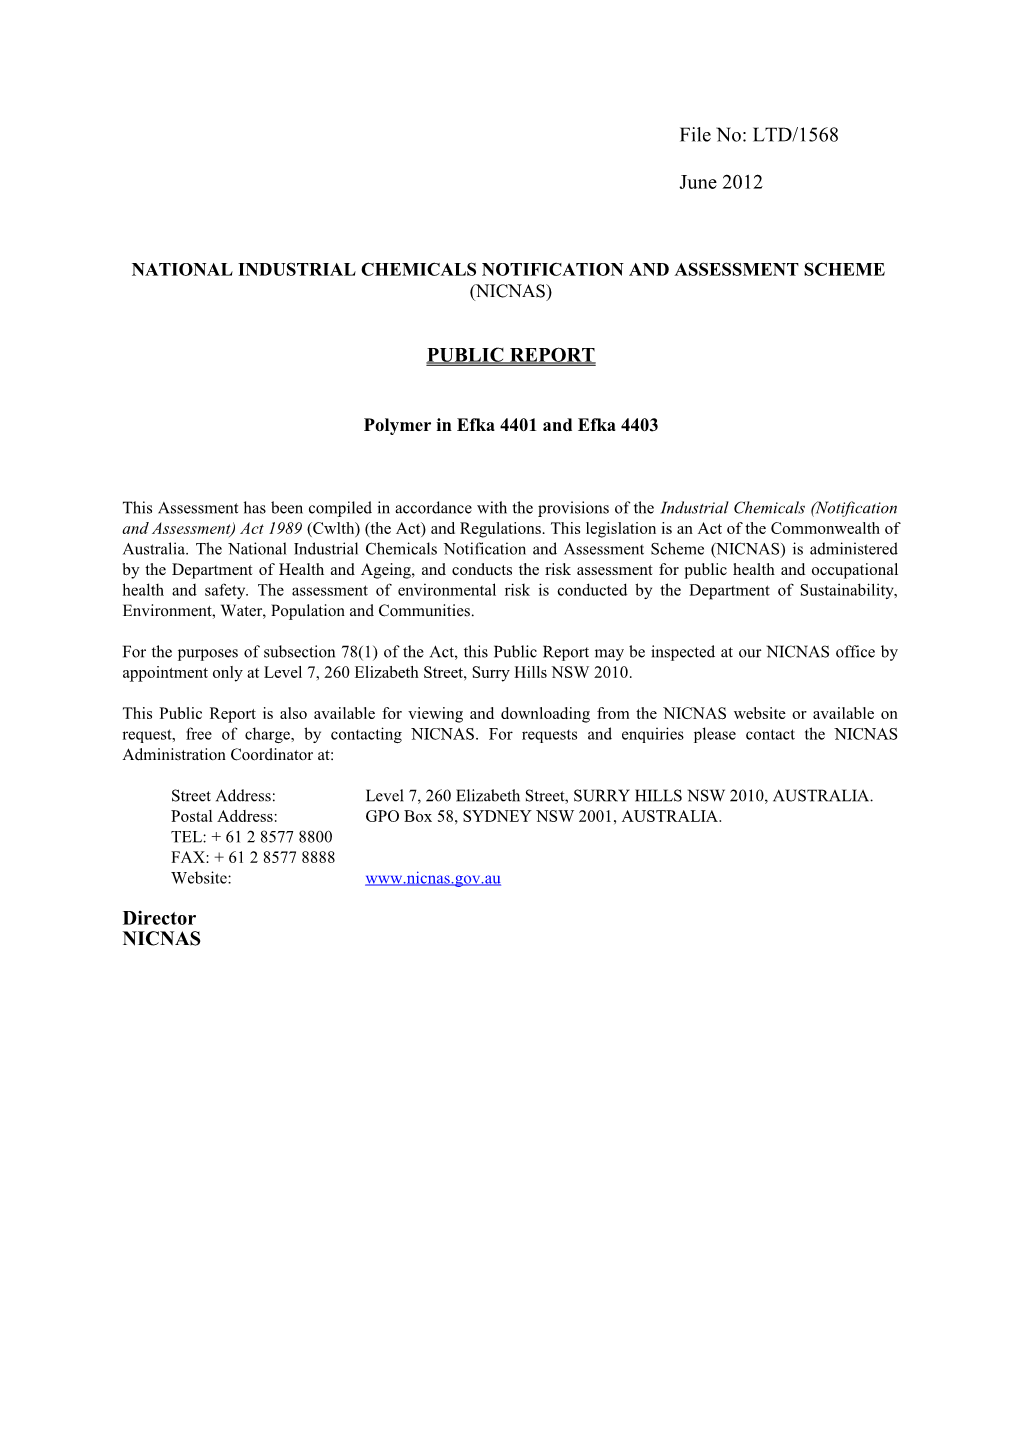 National Industrial Chemicals Notification and Assessment Scheme s47